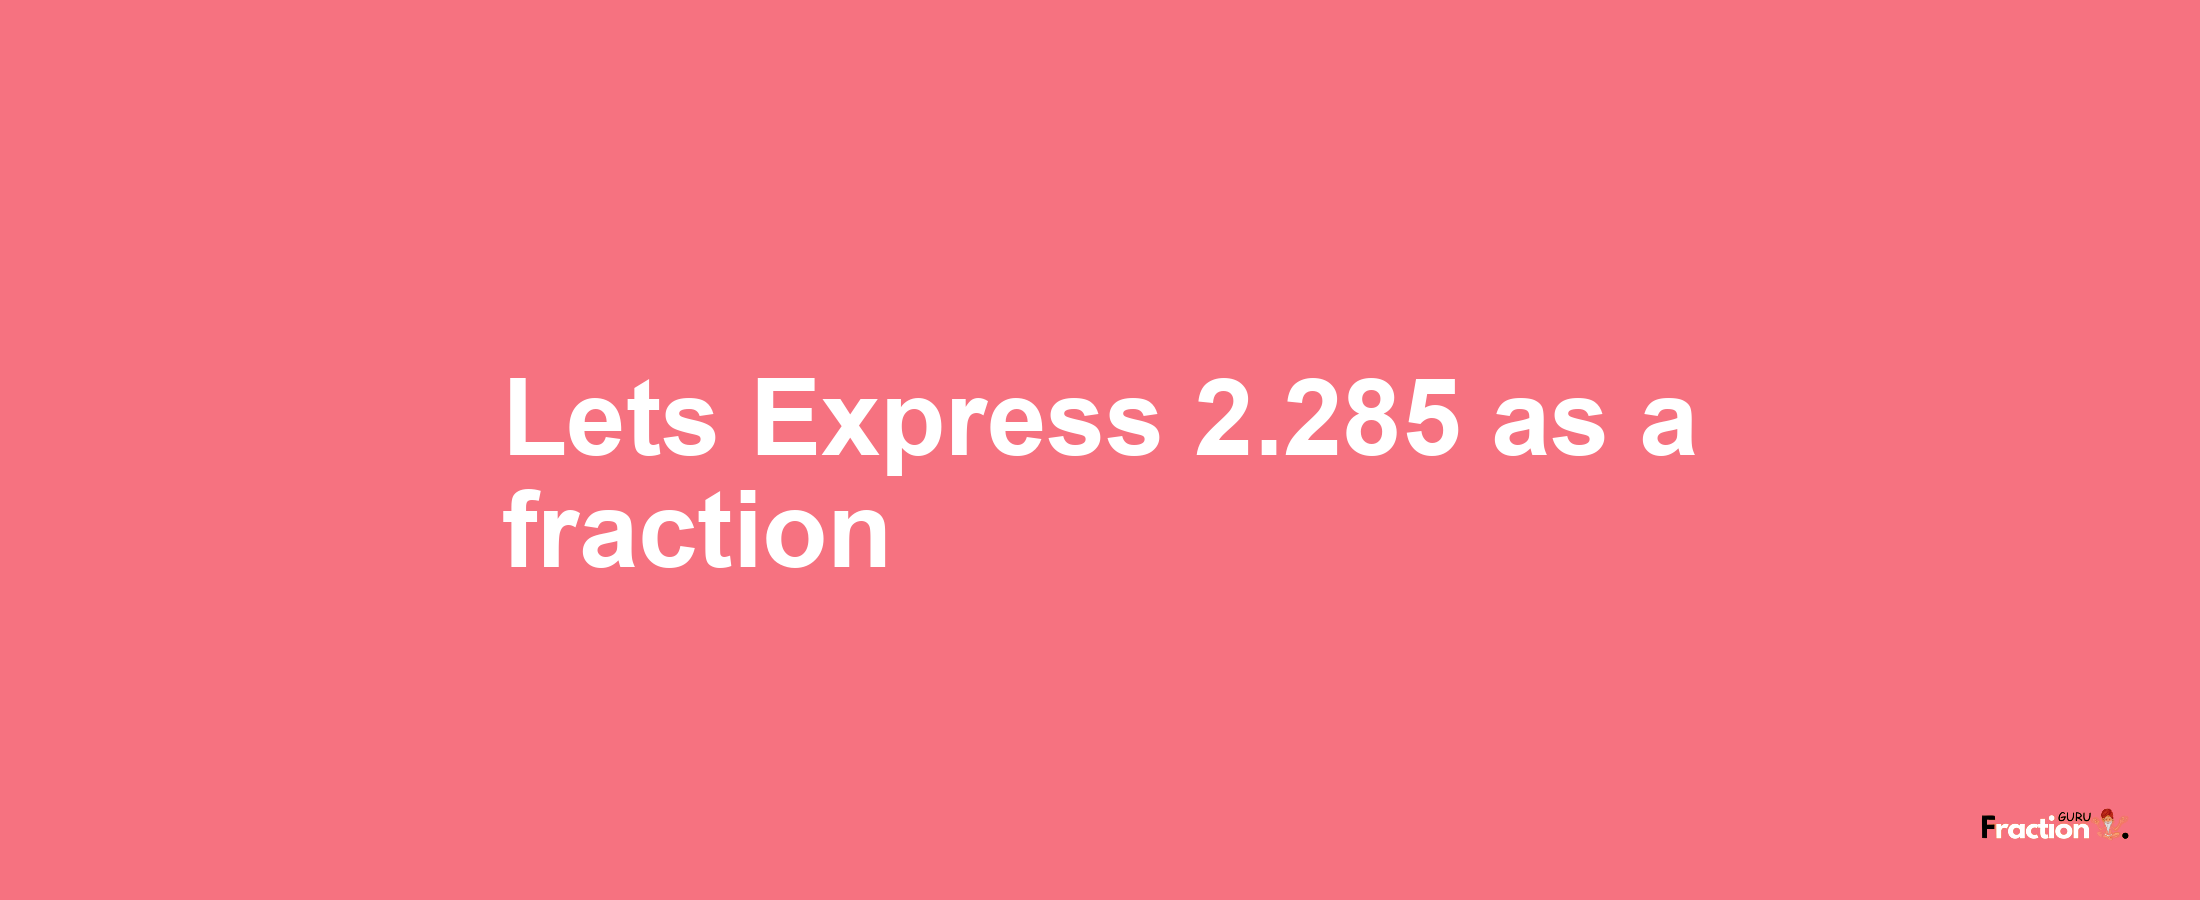 Lets Express 2.285 as afraction